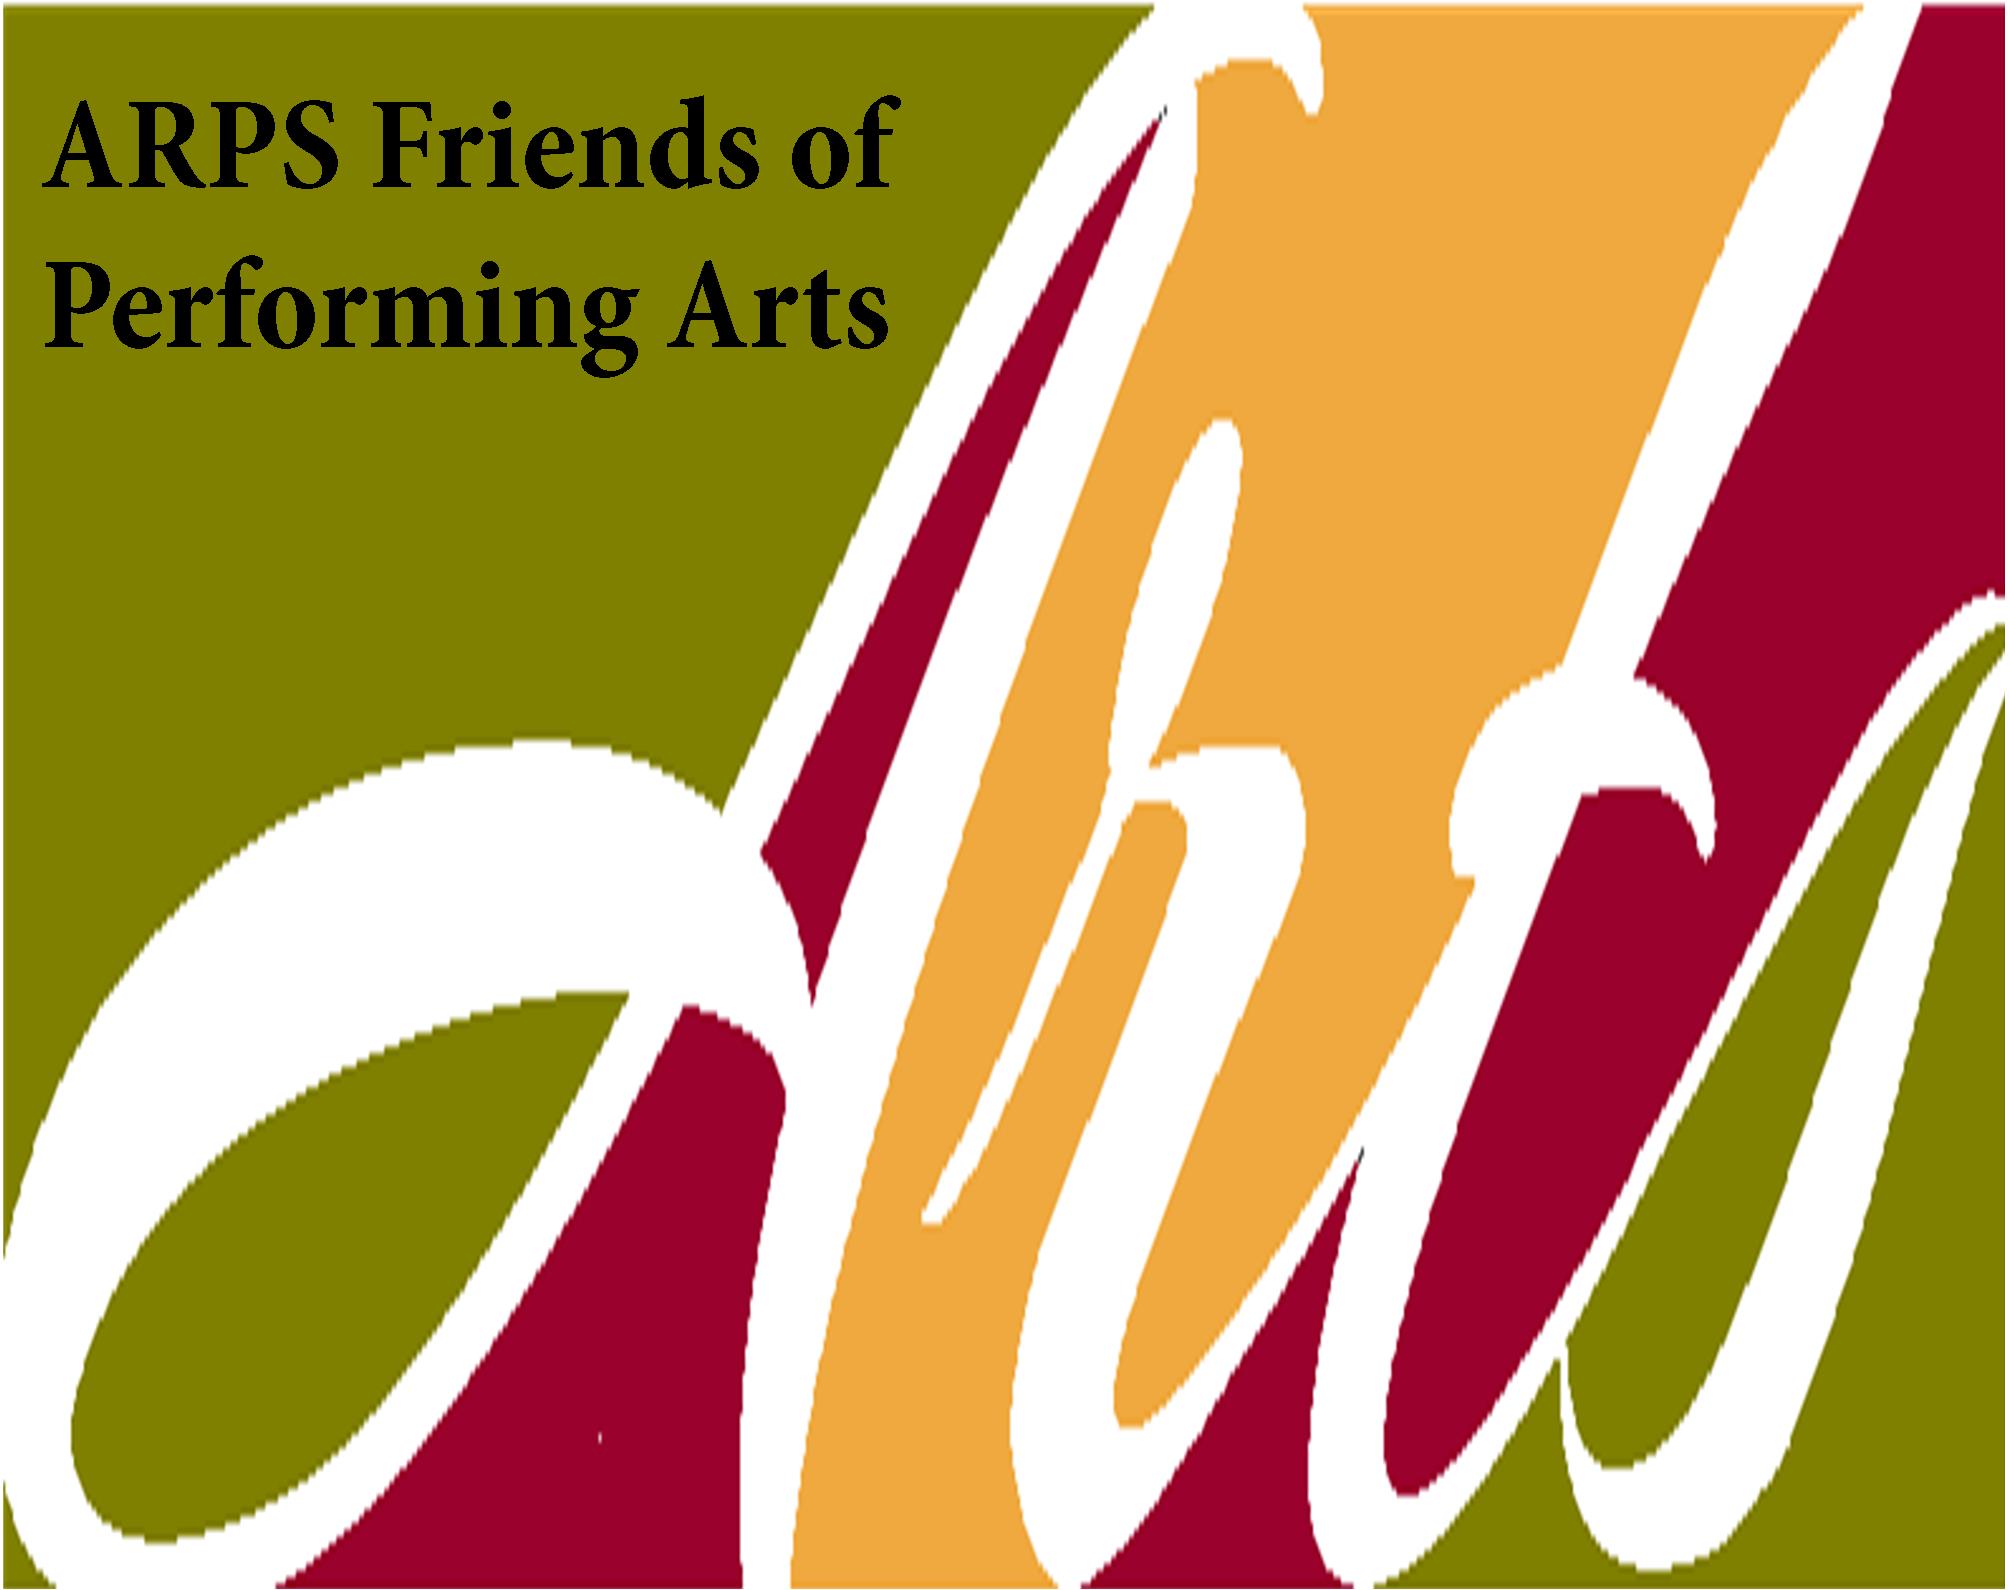 Friends of Performing Arts ARPS logo